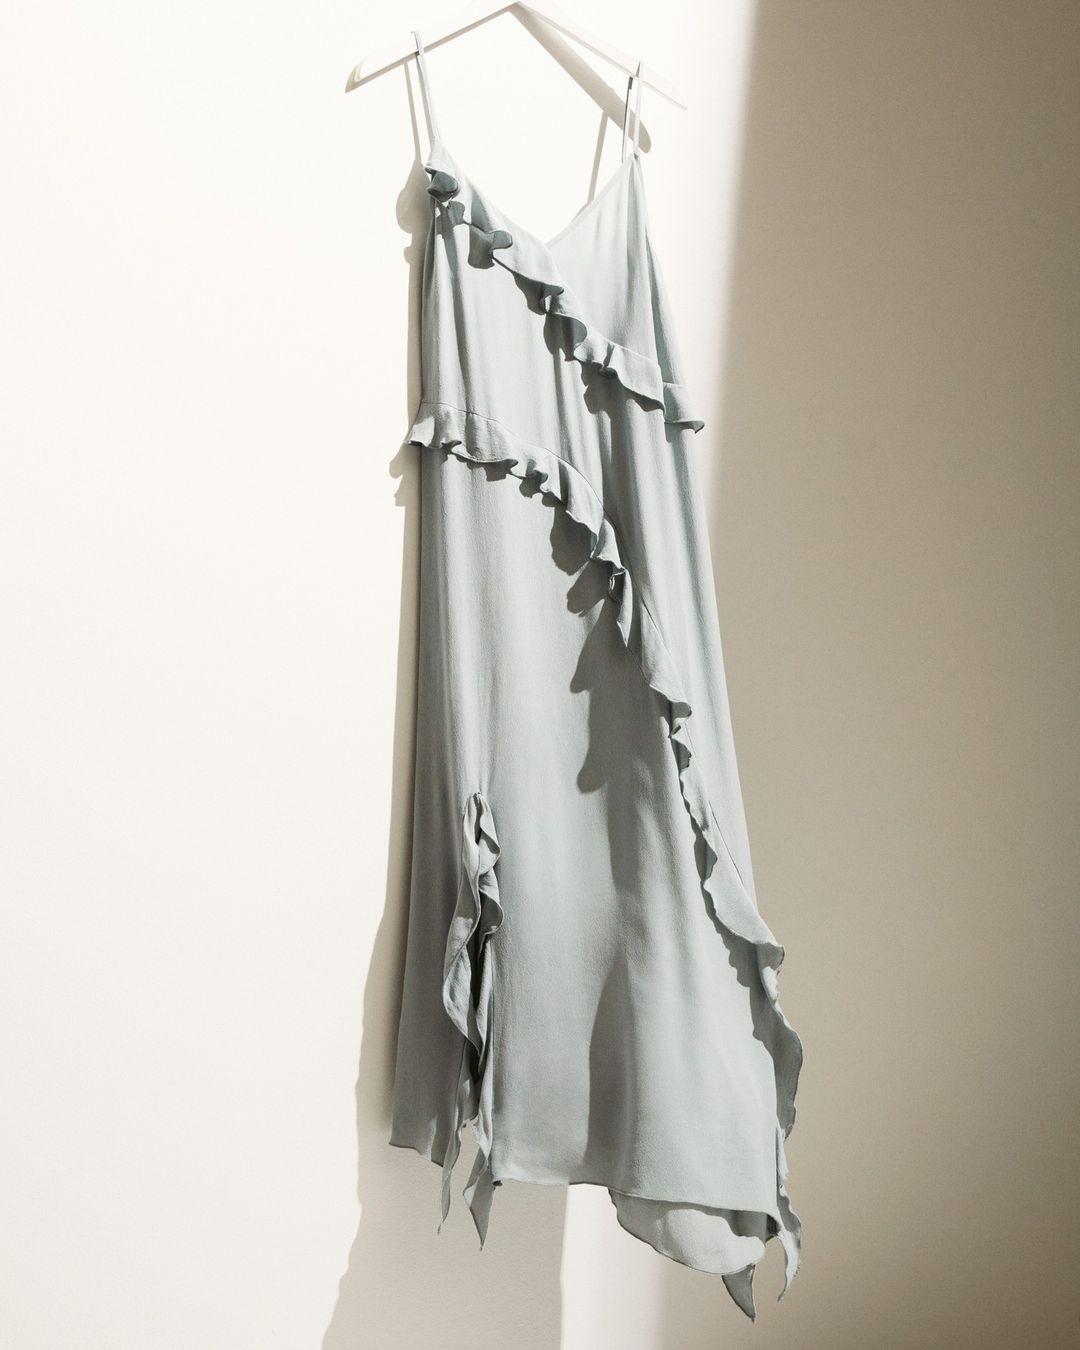 image of a seafoam green H&M dress with ruffles and an asymmetrical hem hanging on a hanger against a white wall